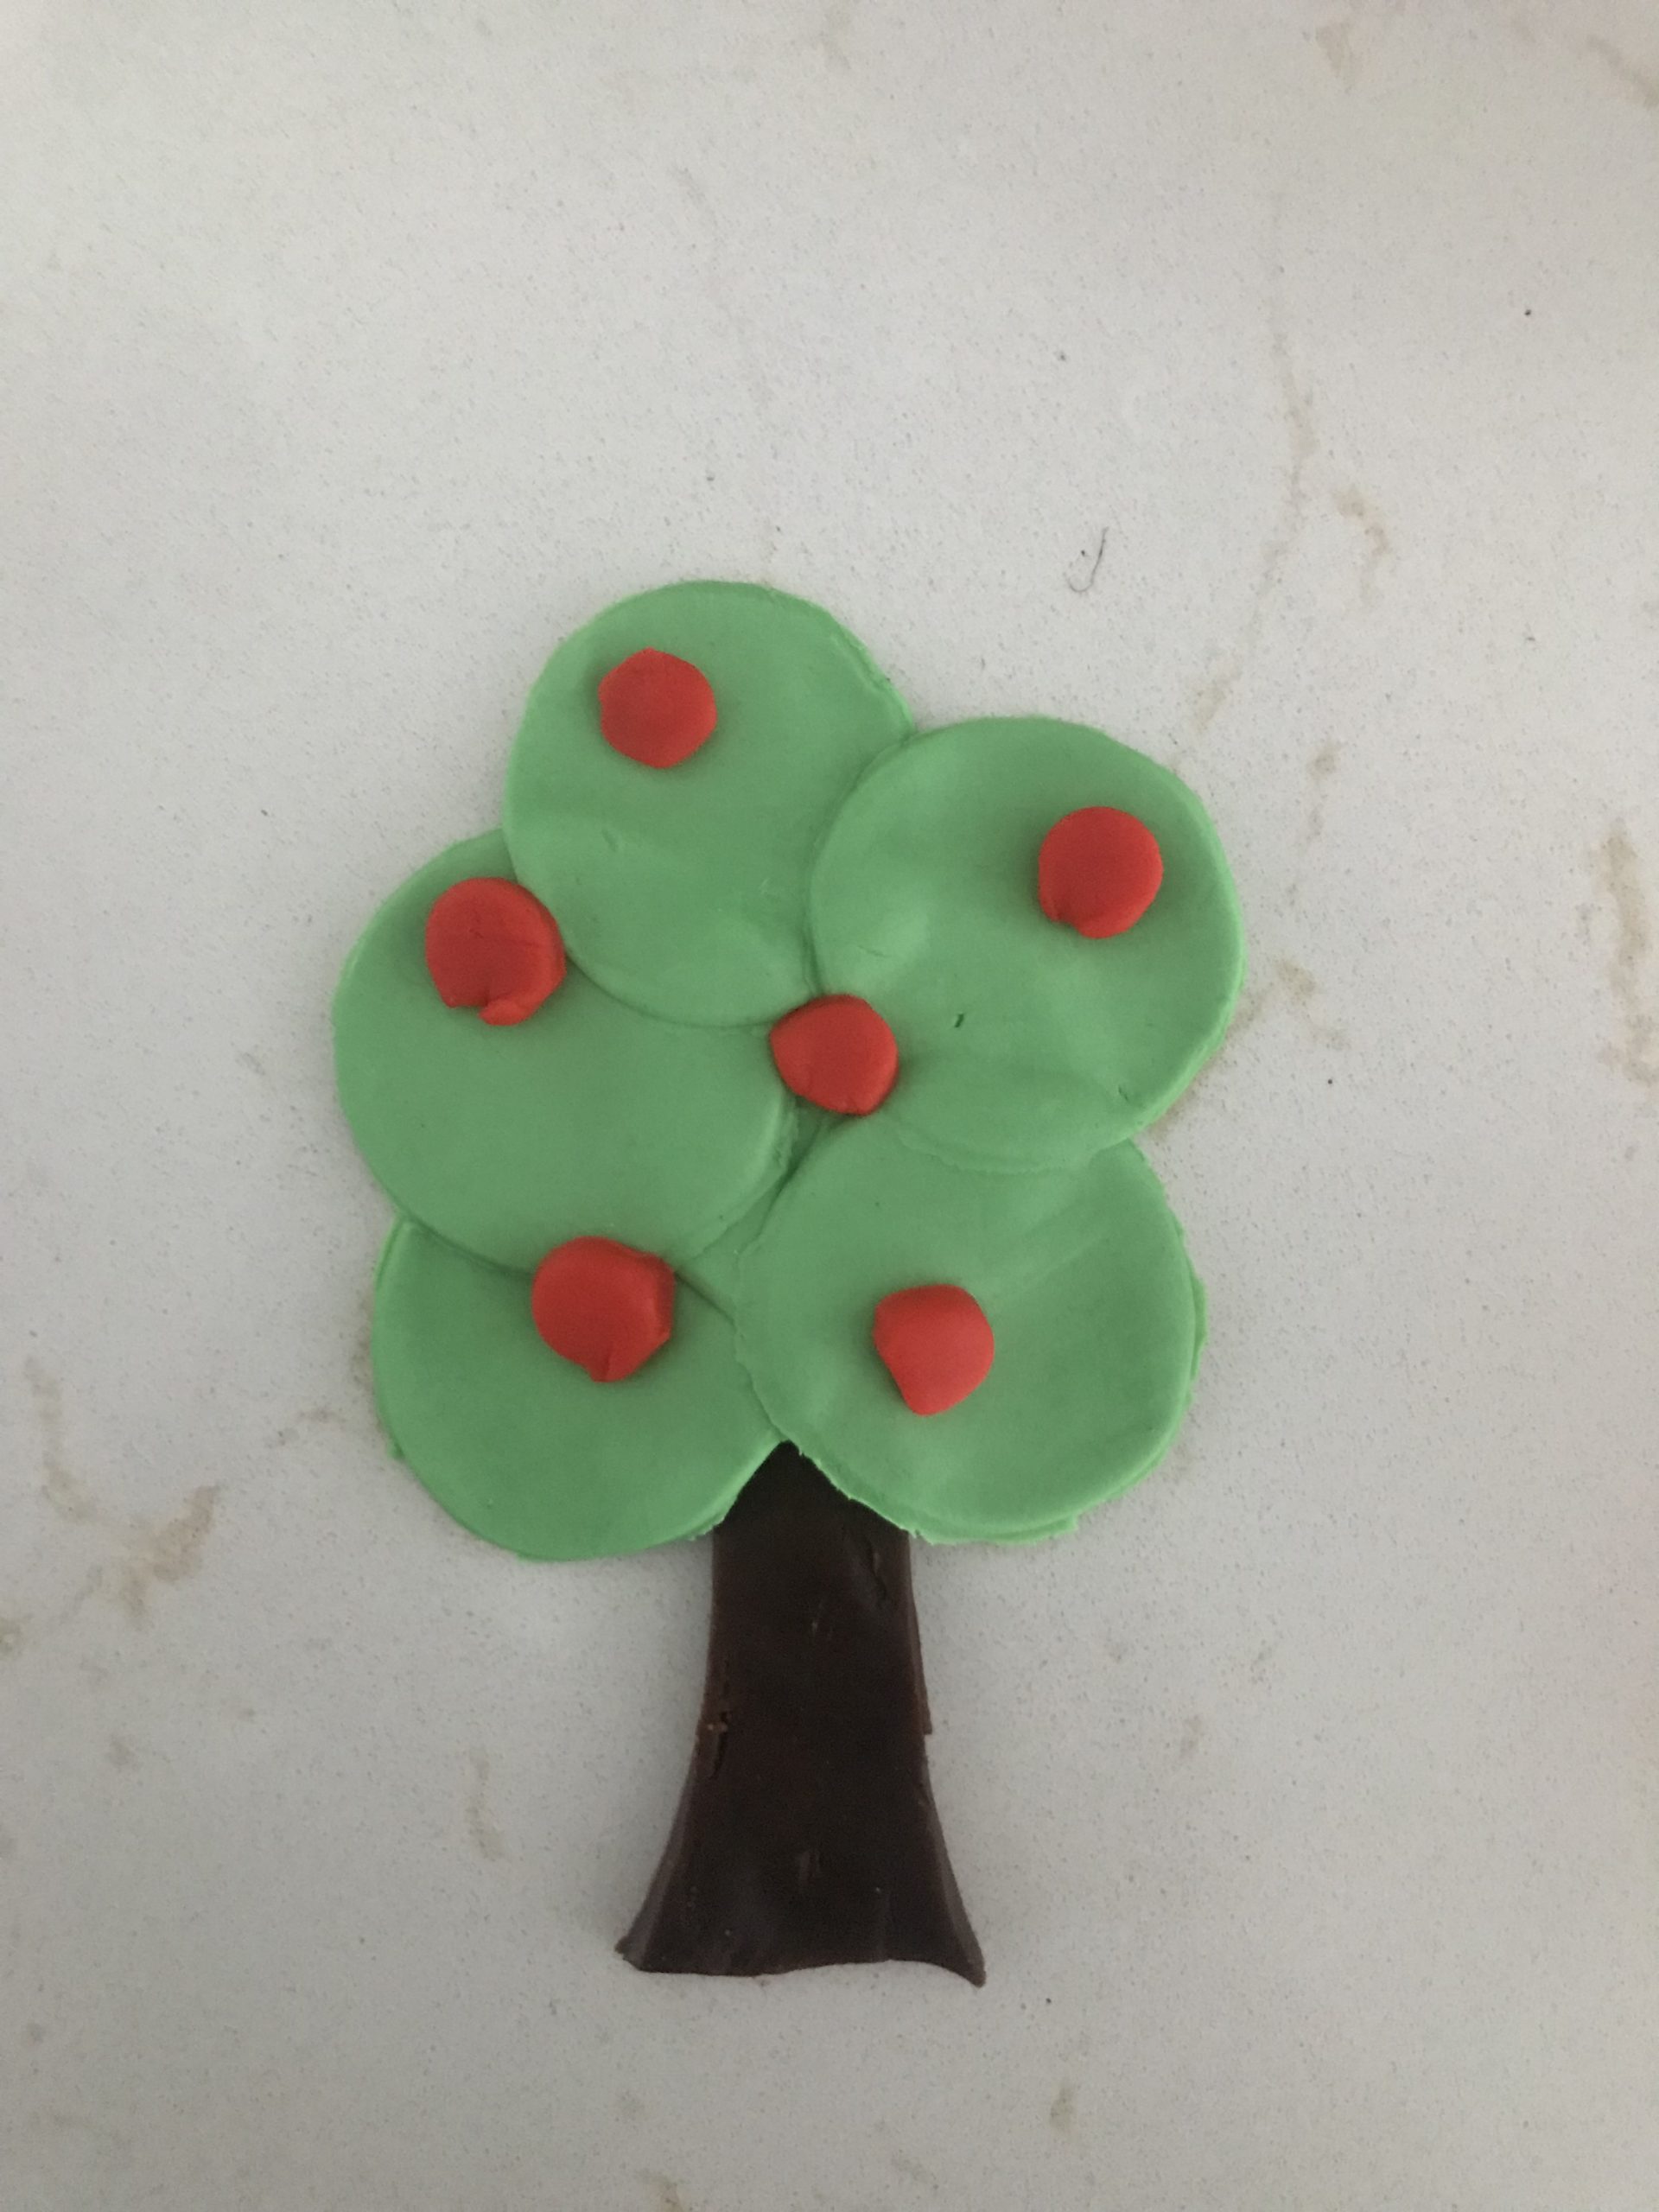 Tree created with green, red, and brown playdough